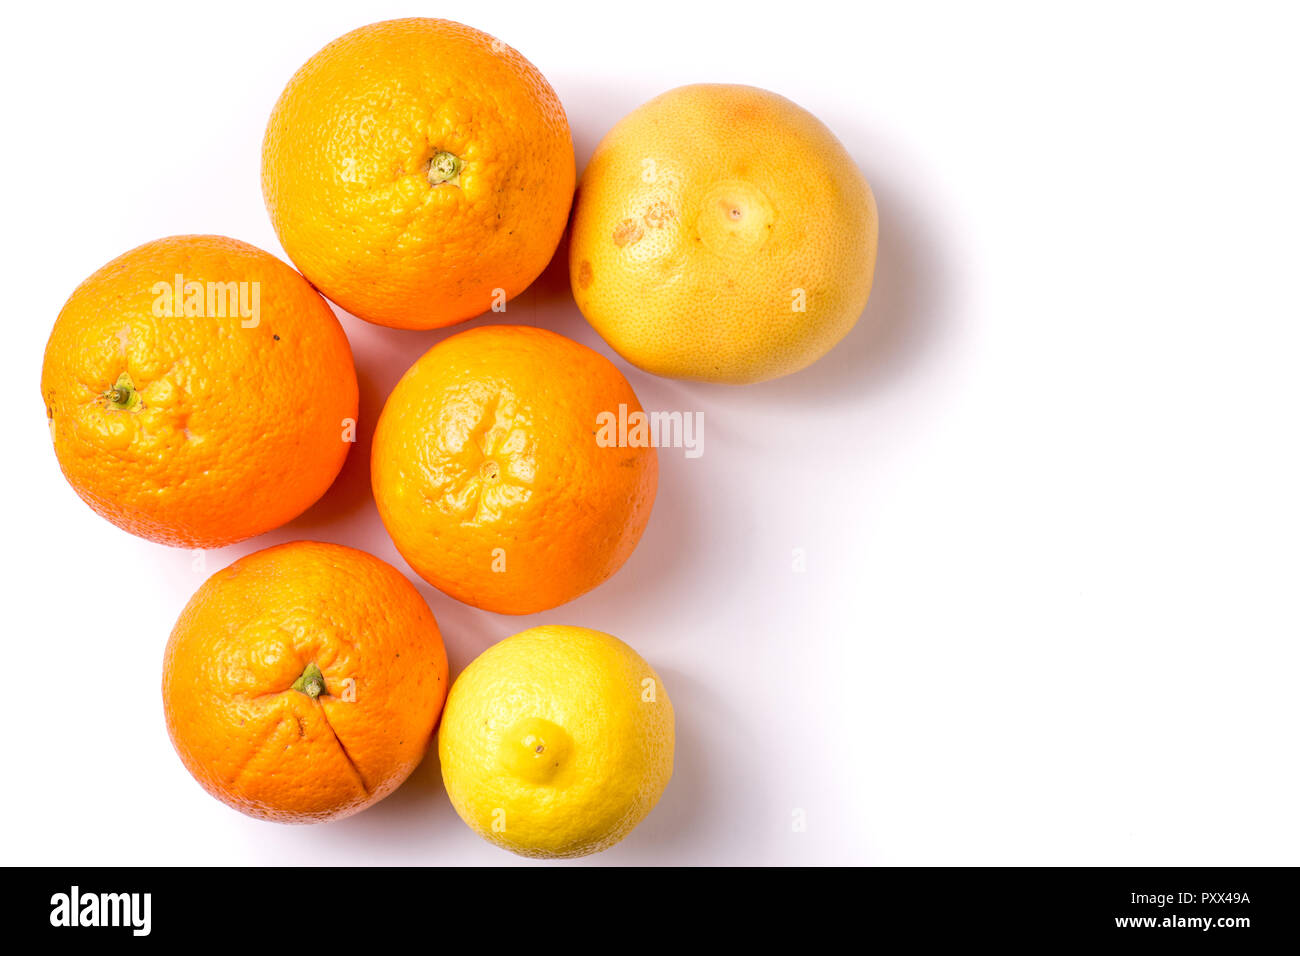 Group of Organic Oranges and lemon, close up and isolated Stock Photo